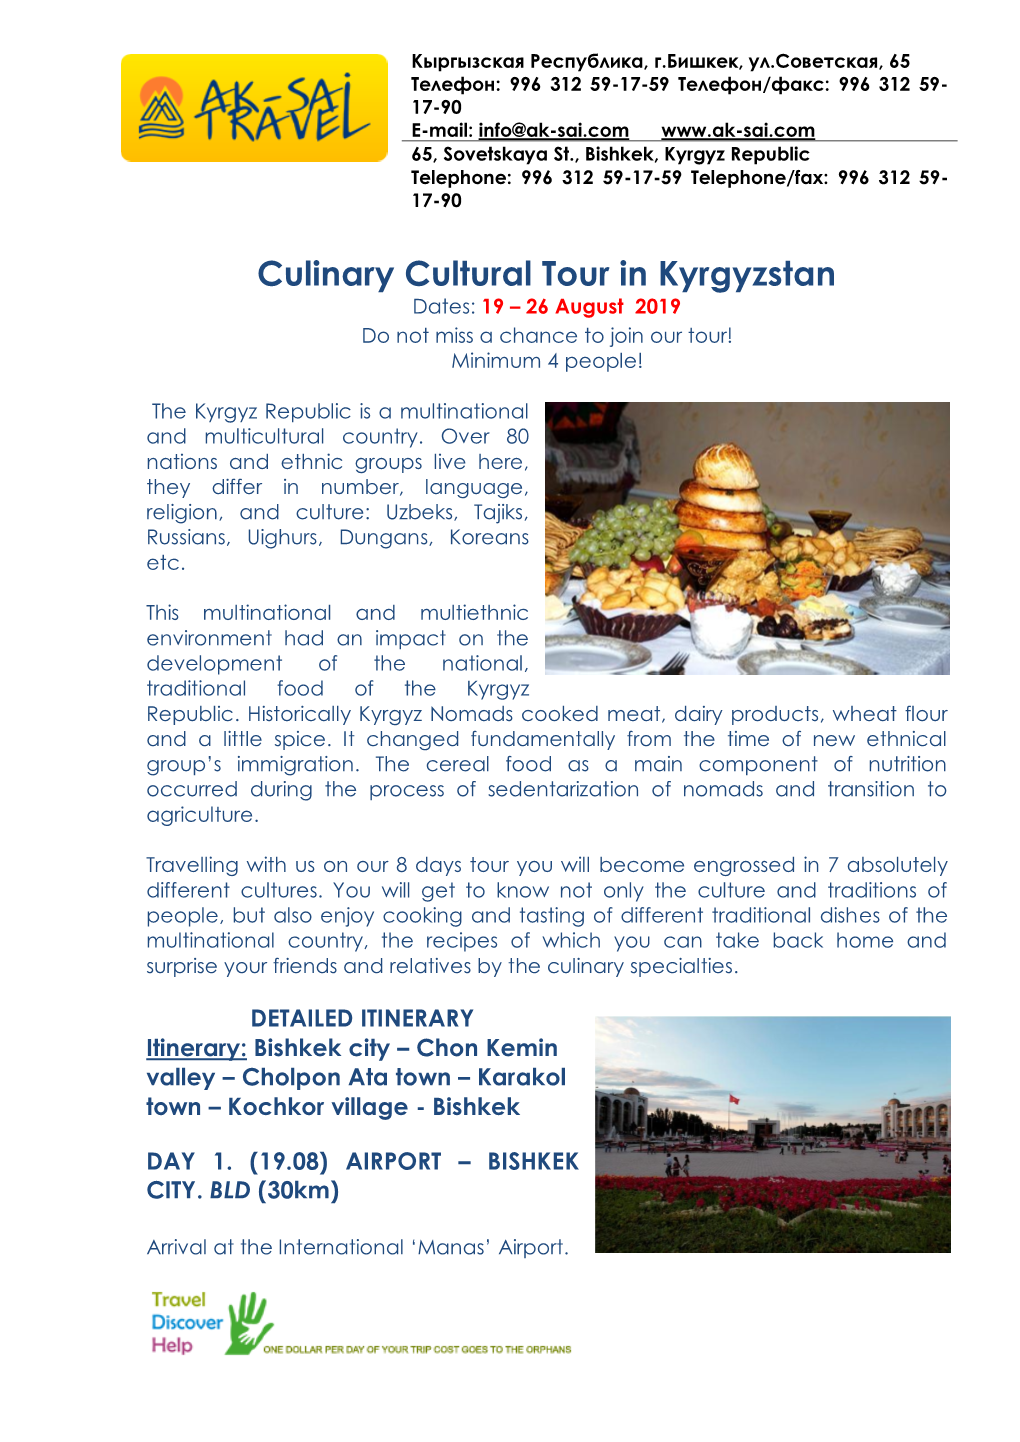 Culinary Cultural Tour in Kyrgyzstan Dates: 19 – 26 August 2019 Do Not Miss a Chance to Join Our Tour! Minimum 4 People!